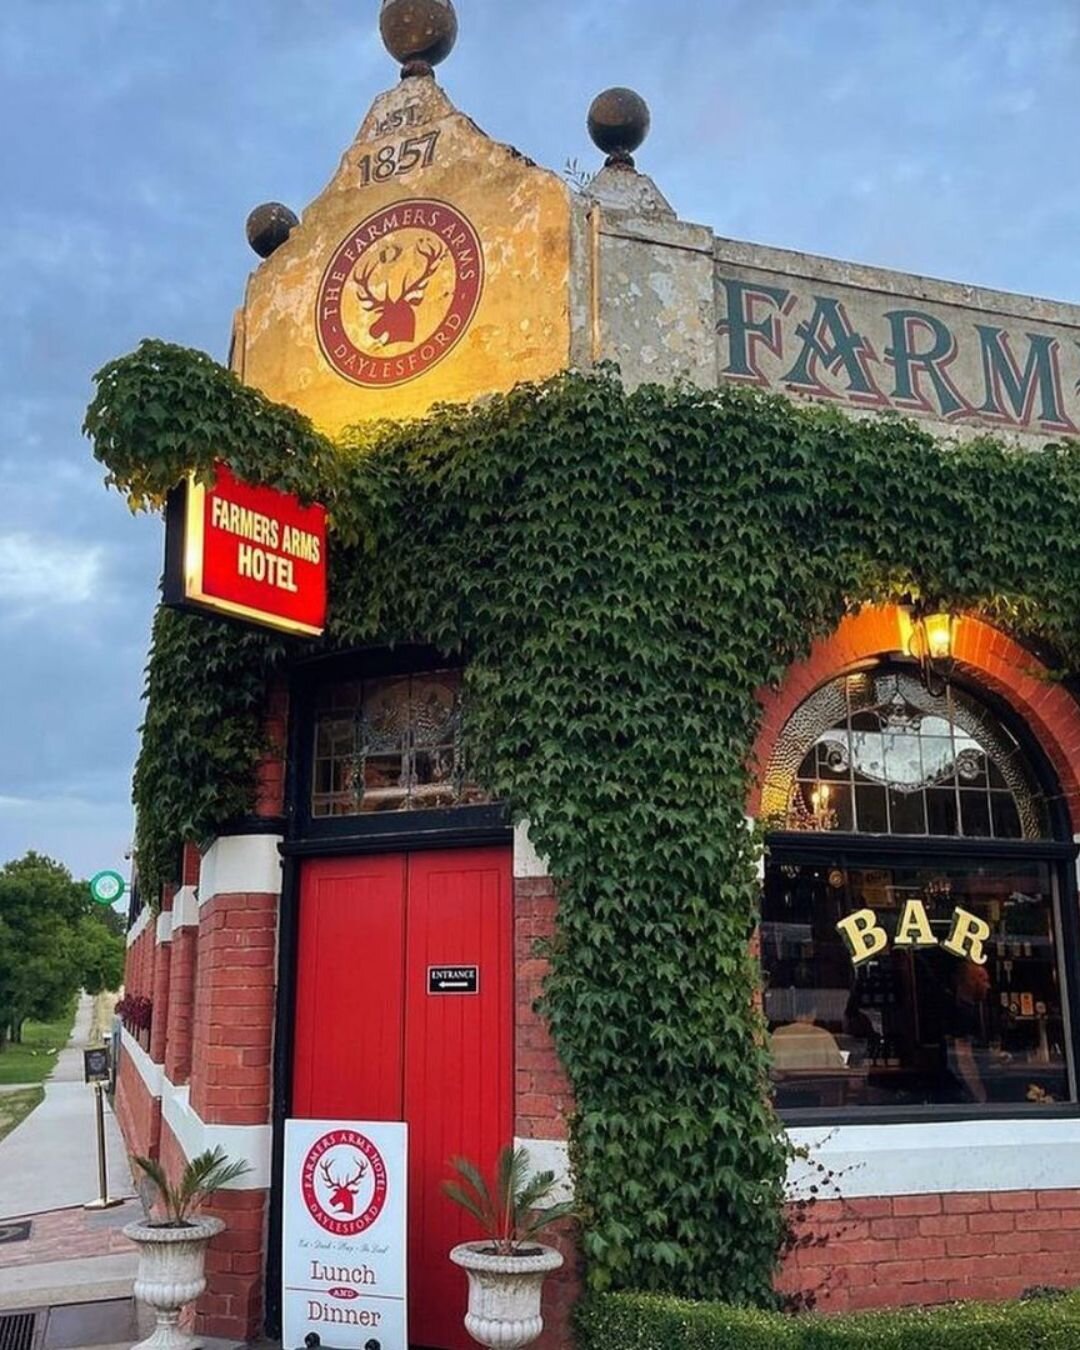 Moments at Farmers Arms Hotel, captured by our beautiful customers! ❤️🥰

📸 by @iam.lauracole &amp; @sarahfitz_

.
.
.
.
.
#beergarden #daylesford #discoverdaylesford #daylesfordmacedonlife #daylesfordmacedonranges #pub #victoria #regionalvictoria #